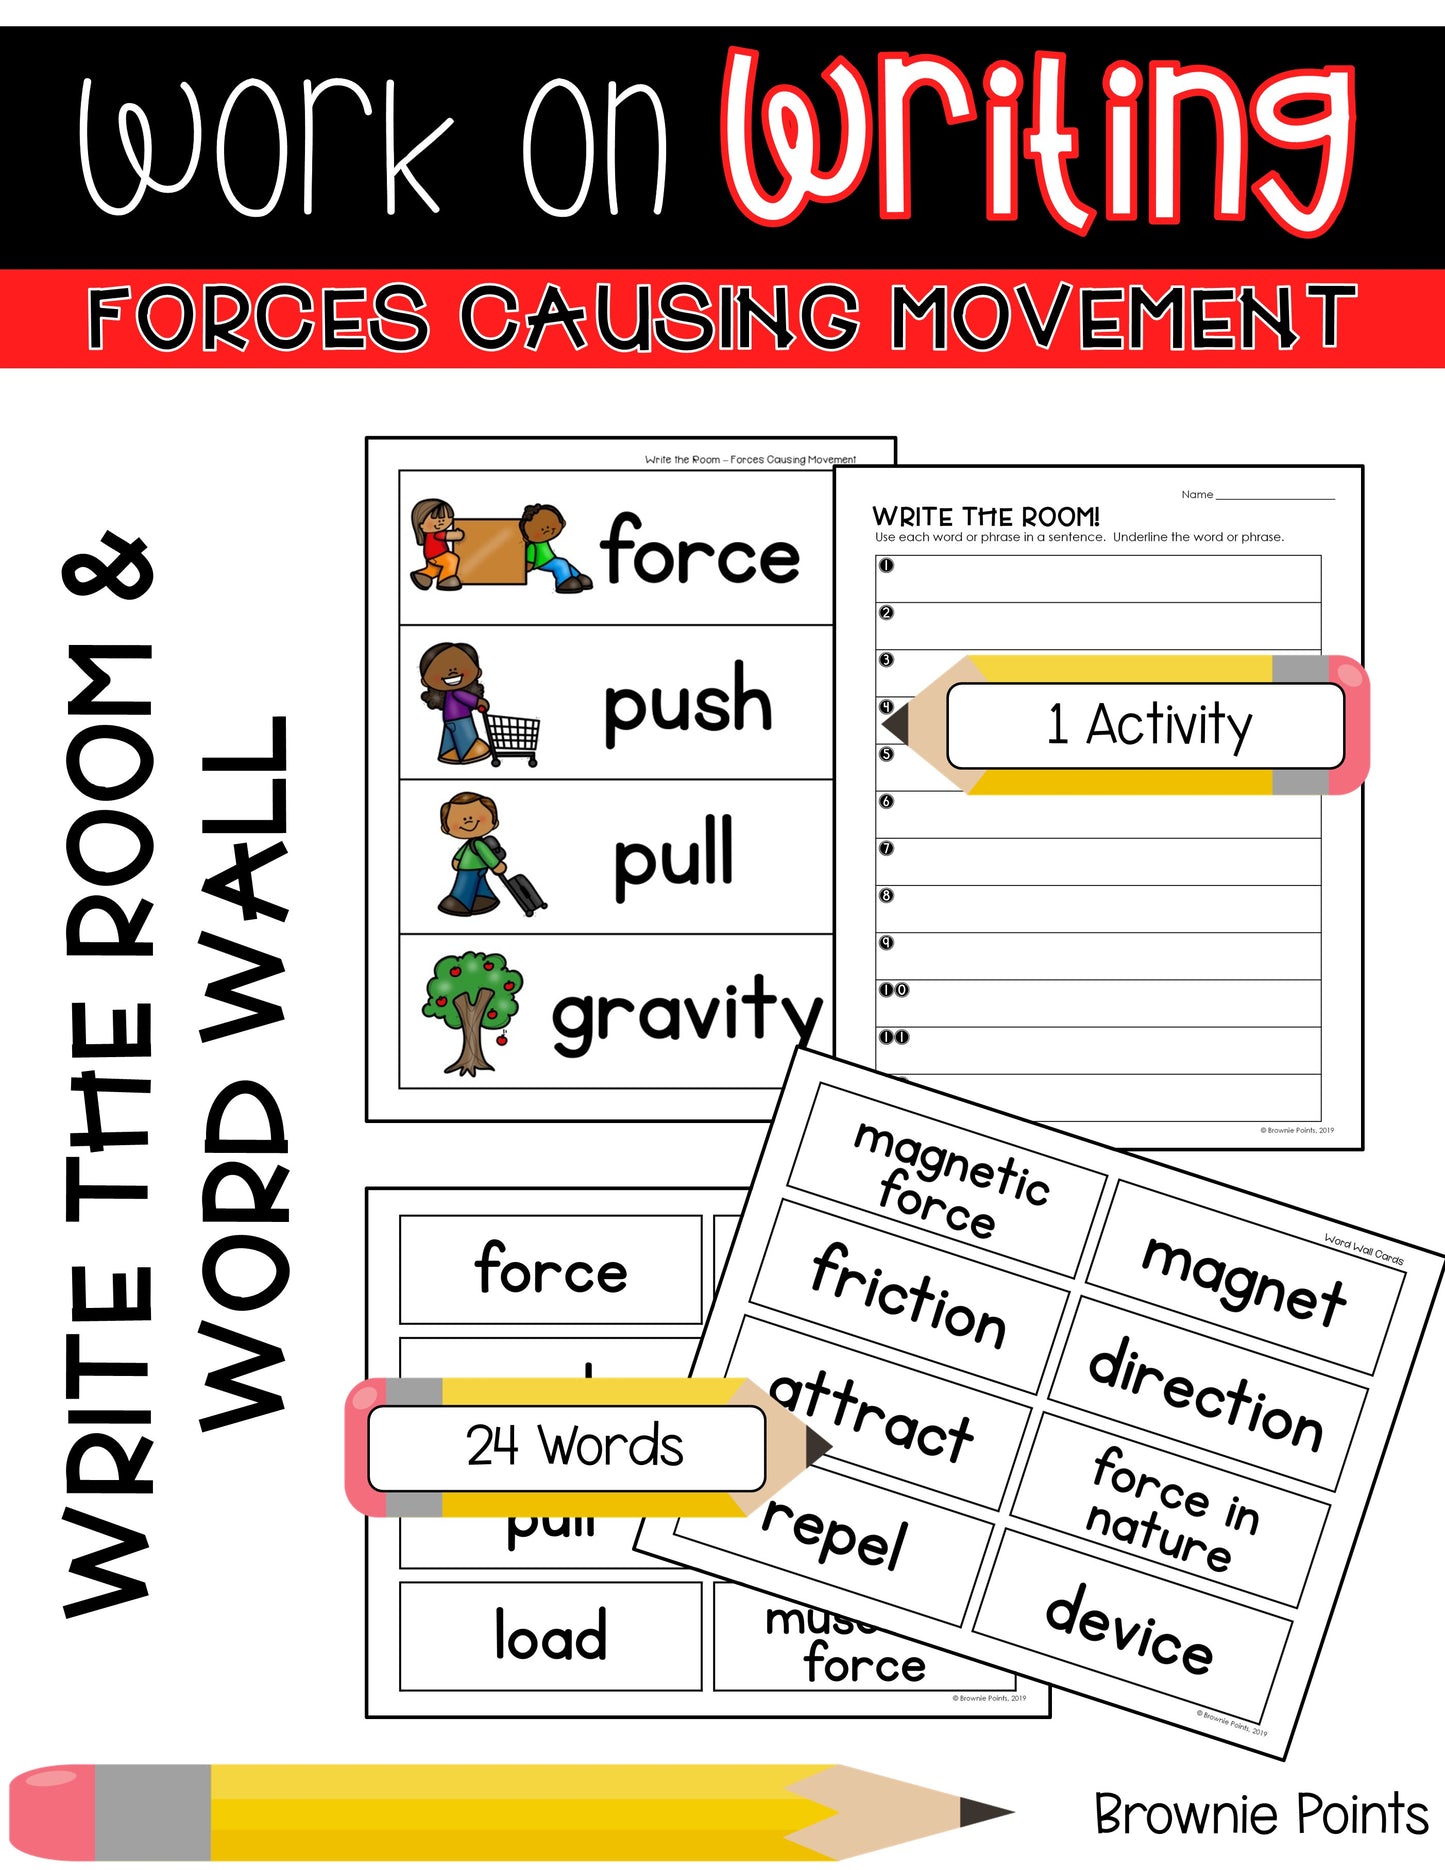 Work on Writing - Forces Causing Movement